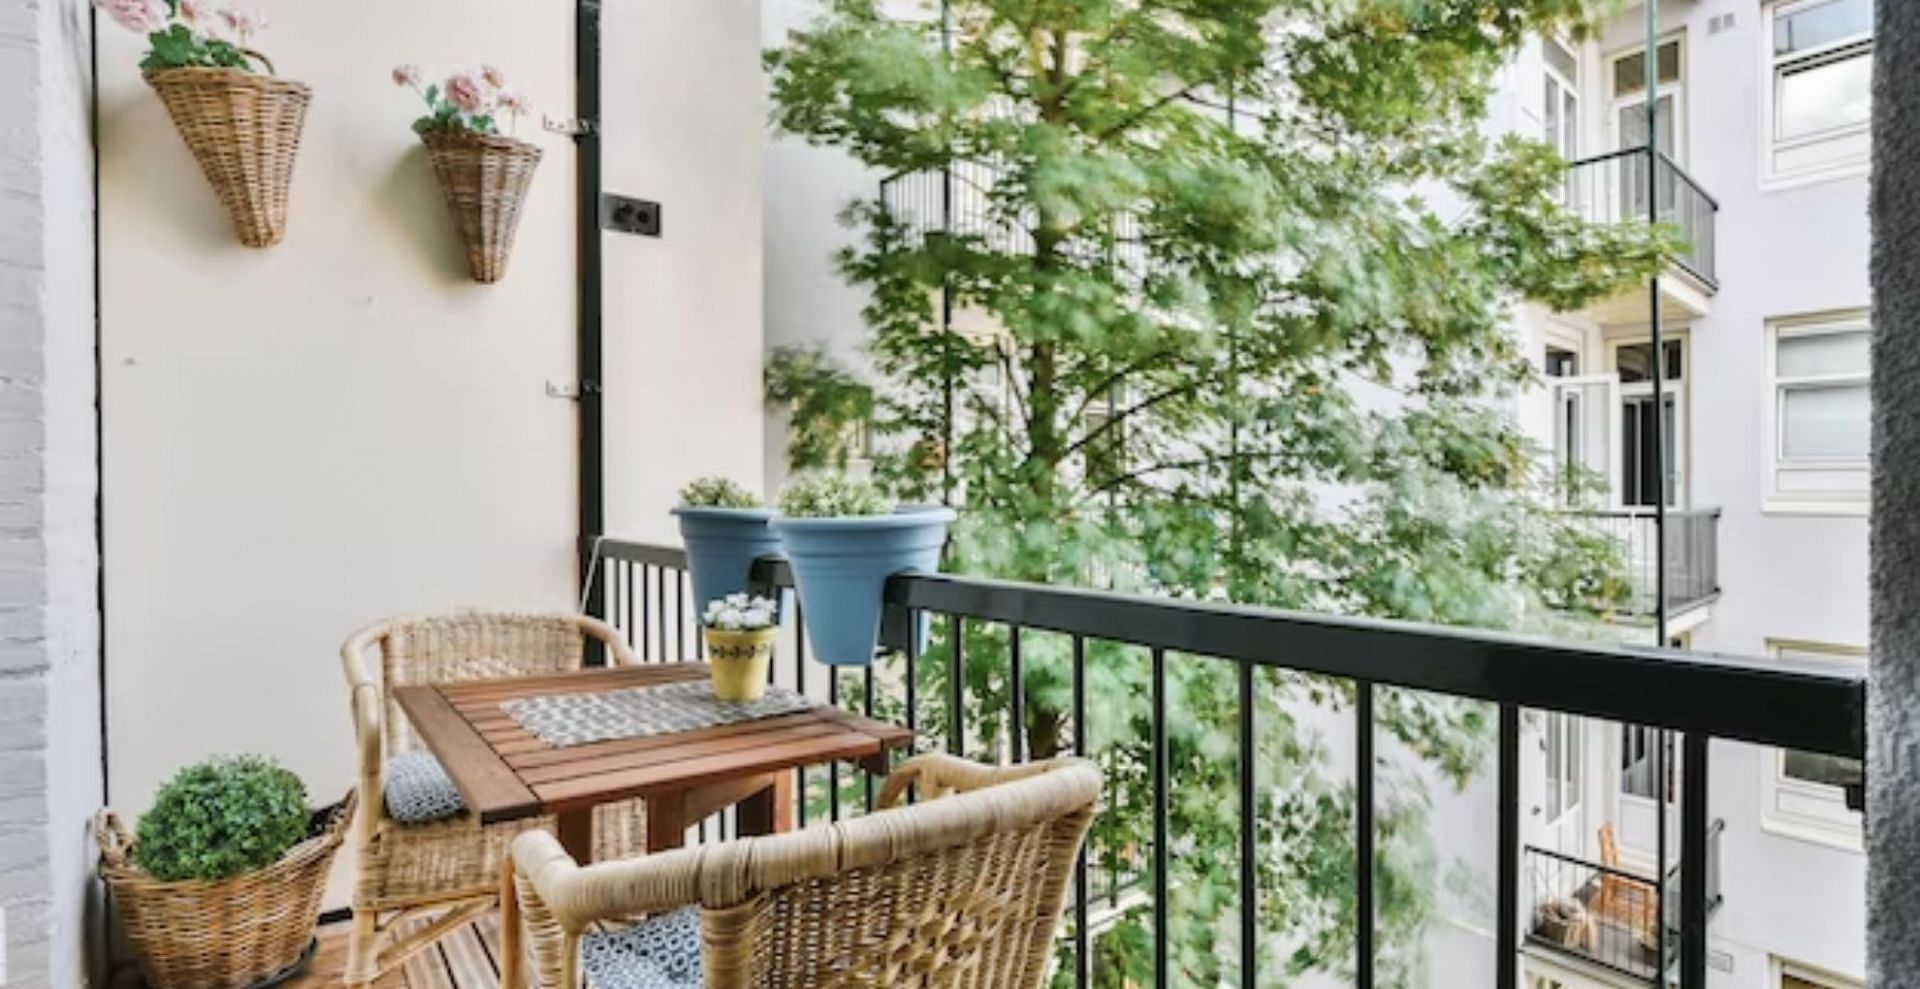 7 Budget-friendly ideas to decorate your small balcony